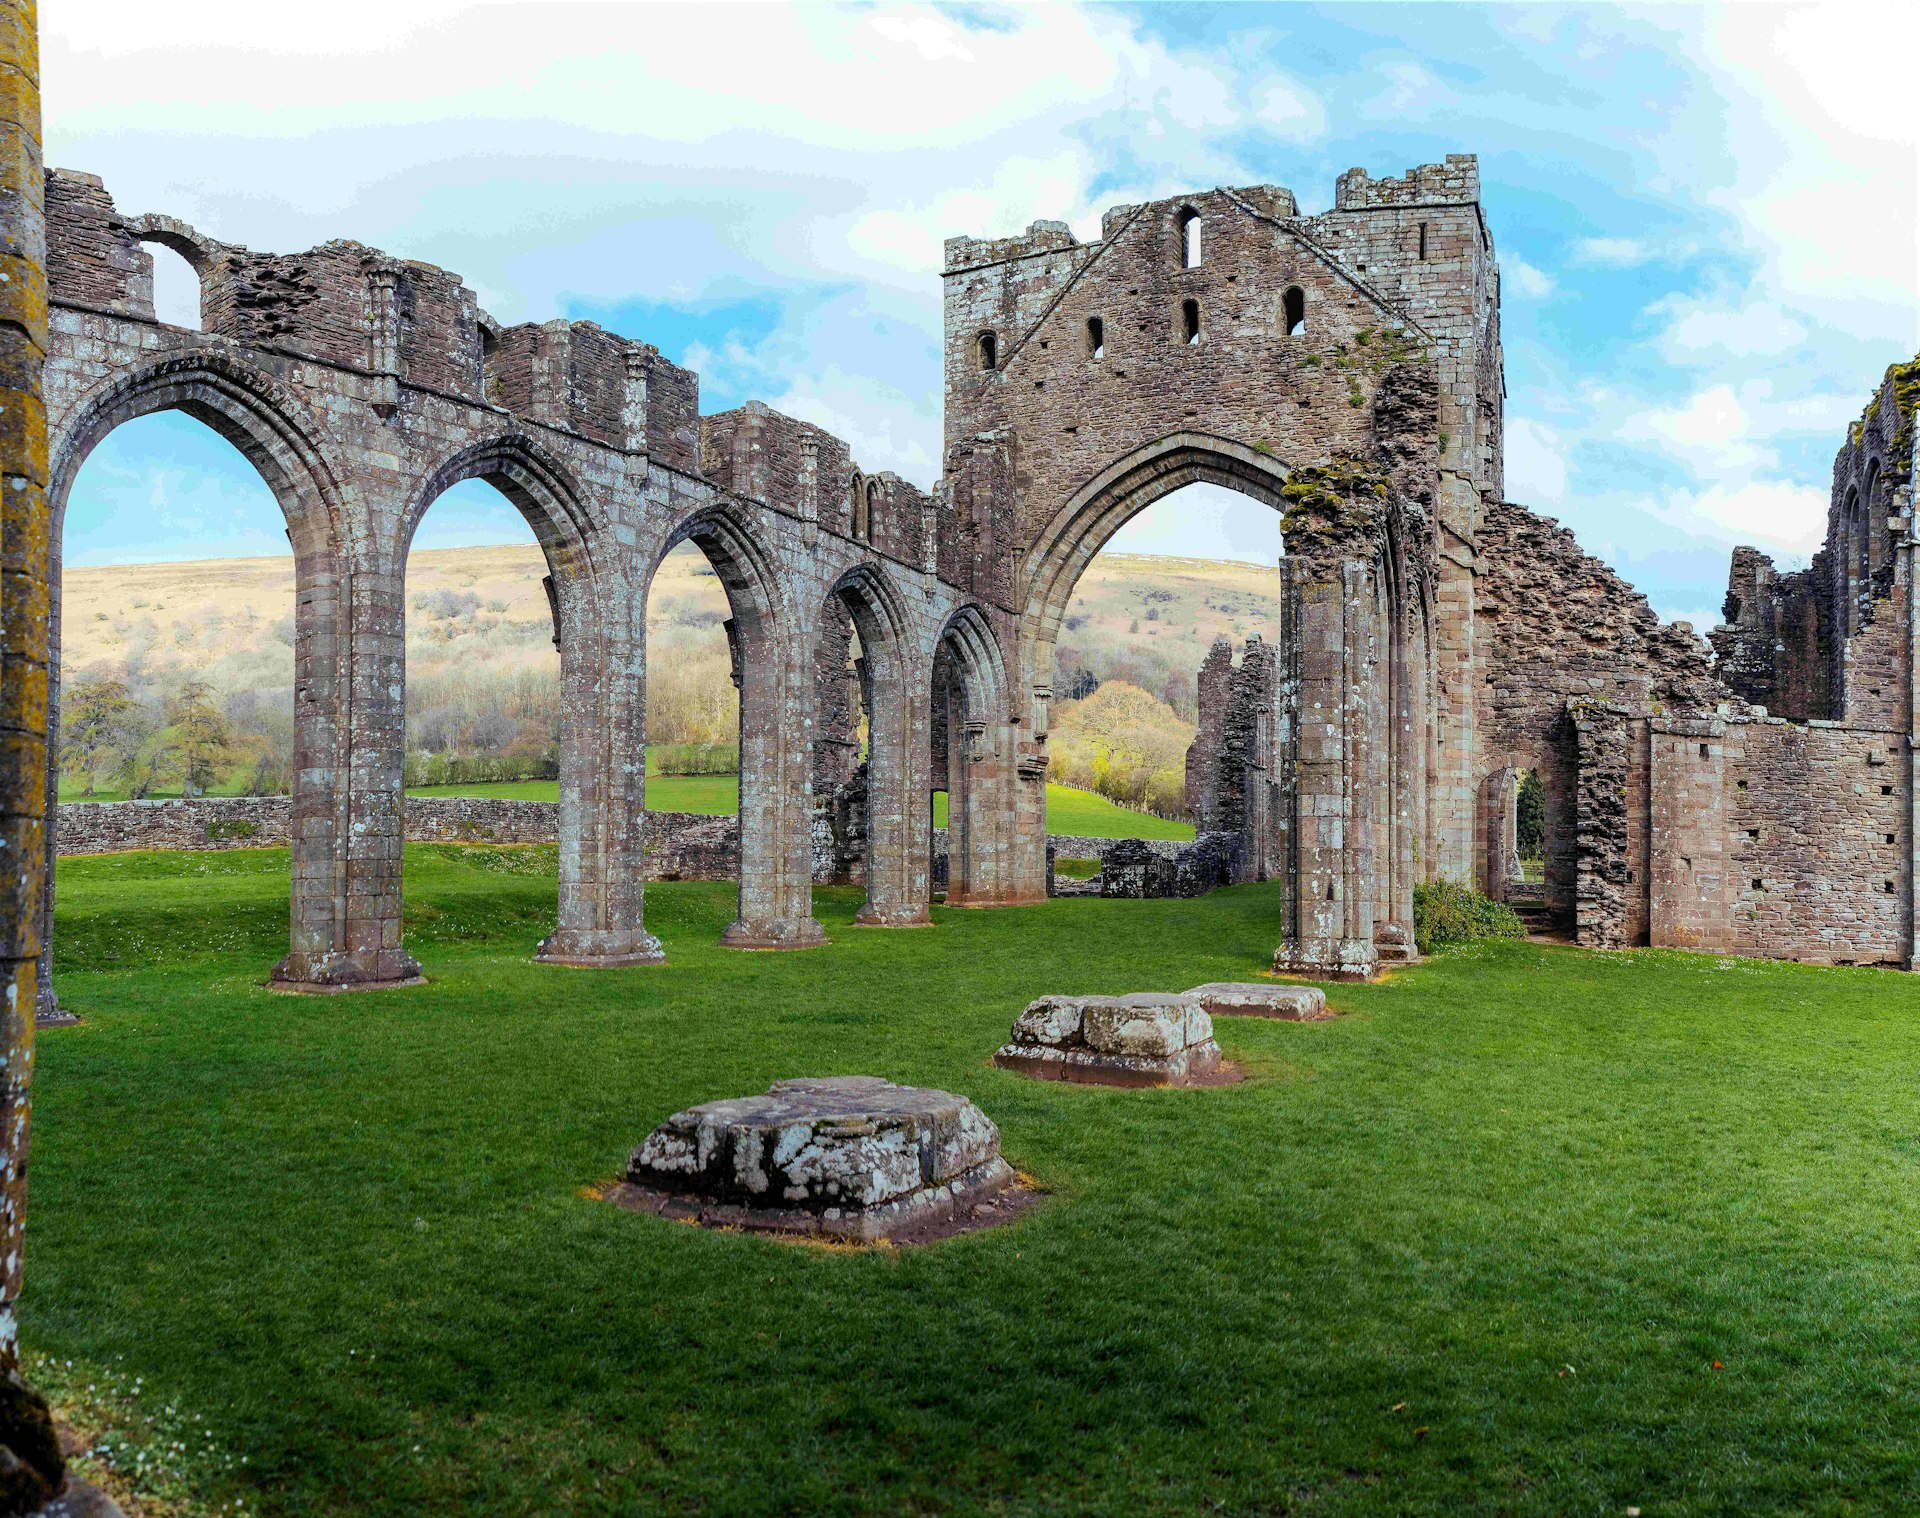 Large stone archways stand in the middle of a green field at the ruins of Llanthony Priory, Wales